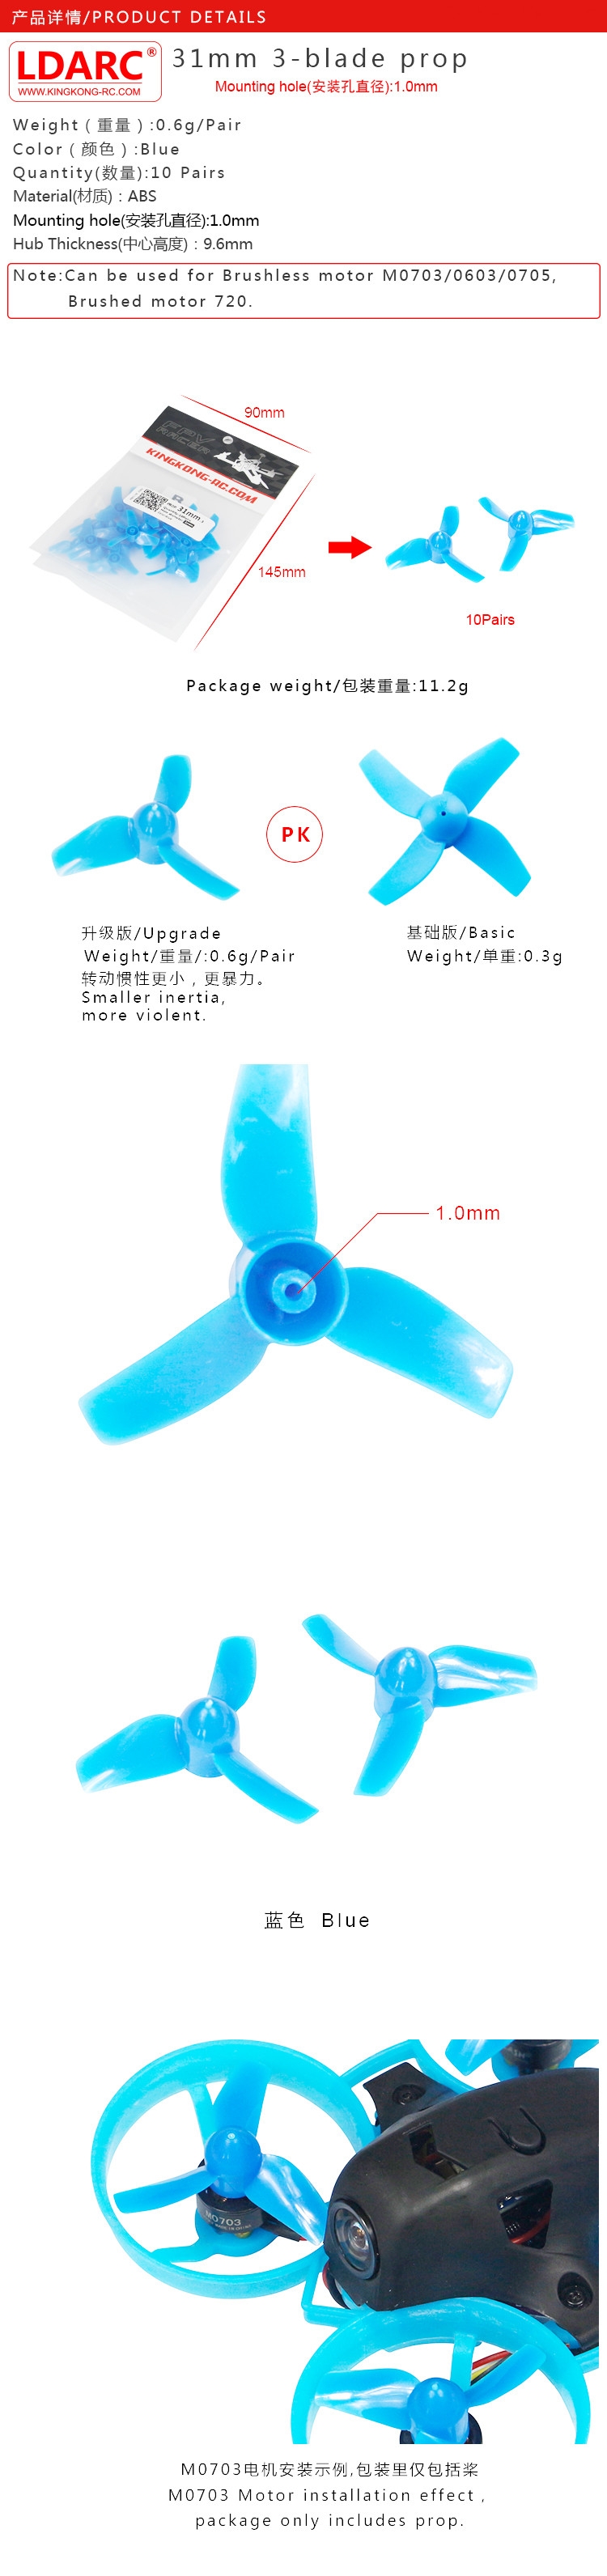 10 Pairs LDARC / Kingkong 31mm Mounting Hole 1.0mm ABS 3-Blade Propeller for 0703 0603 0705 Motor